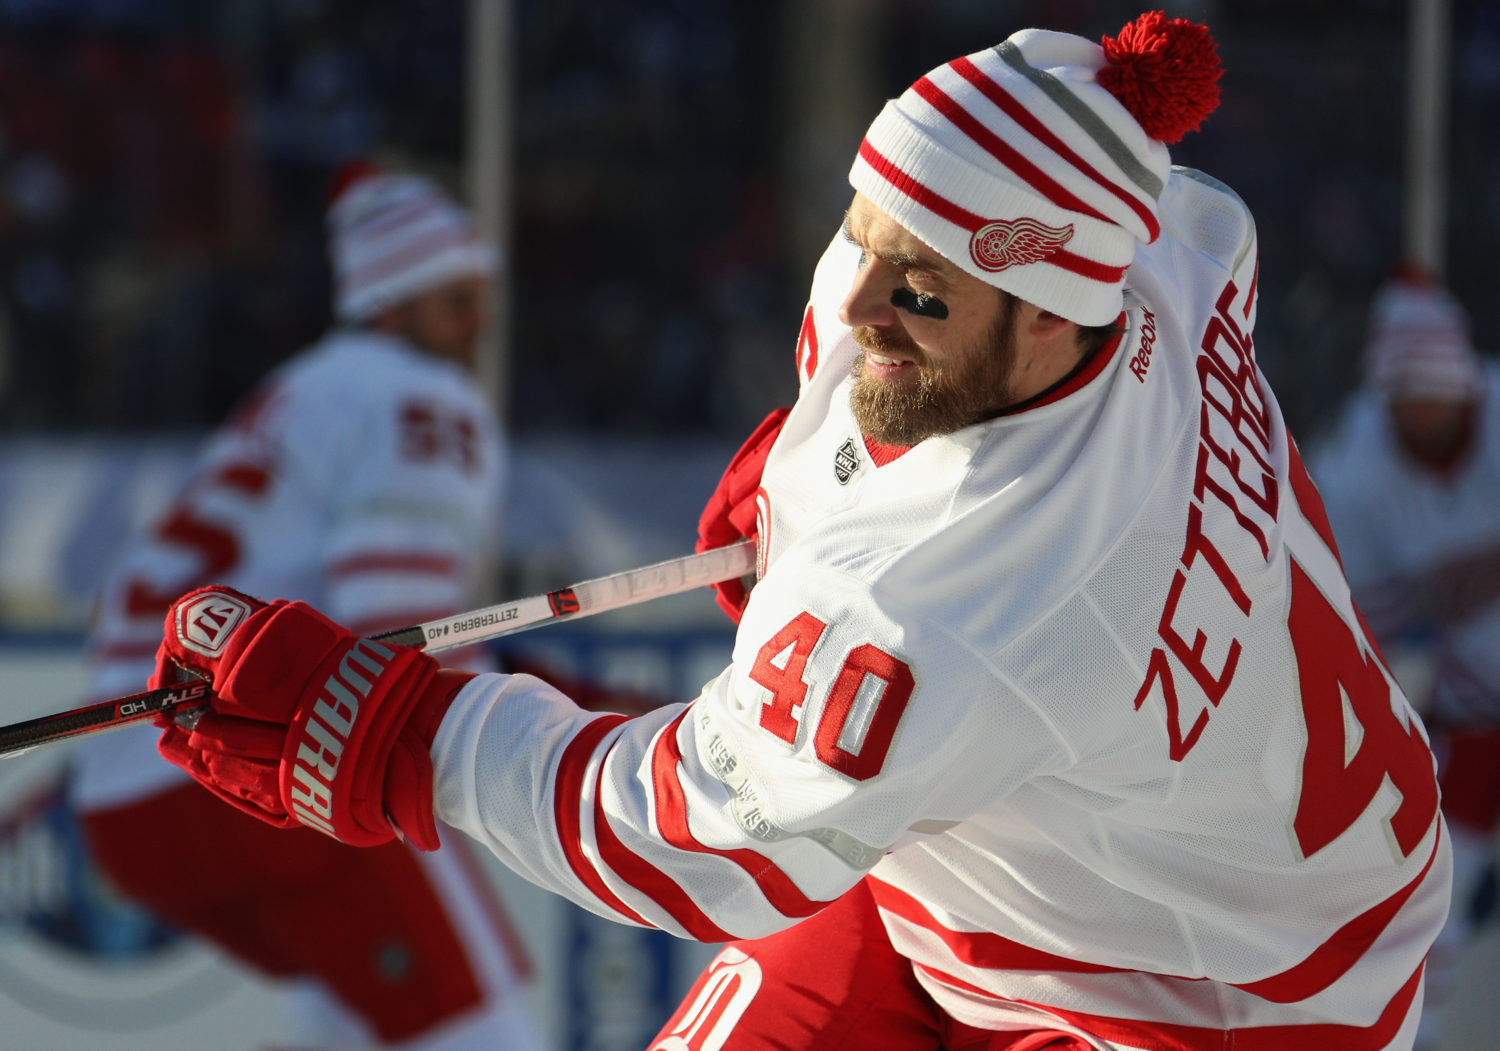 red wings centennial classic jersey